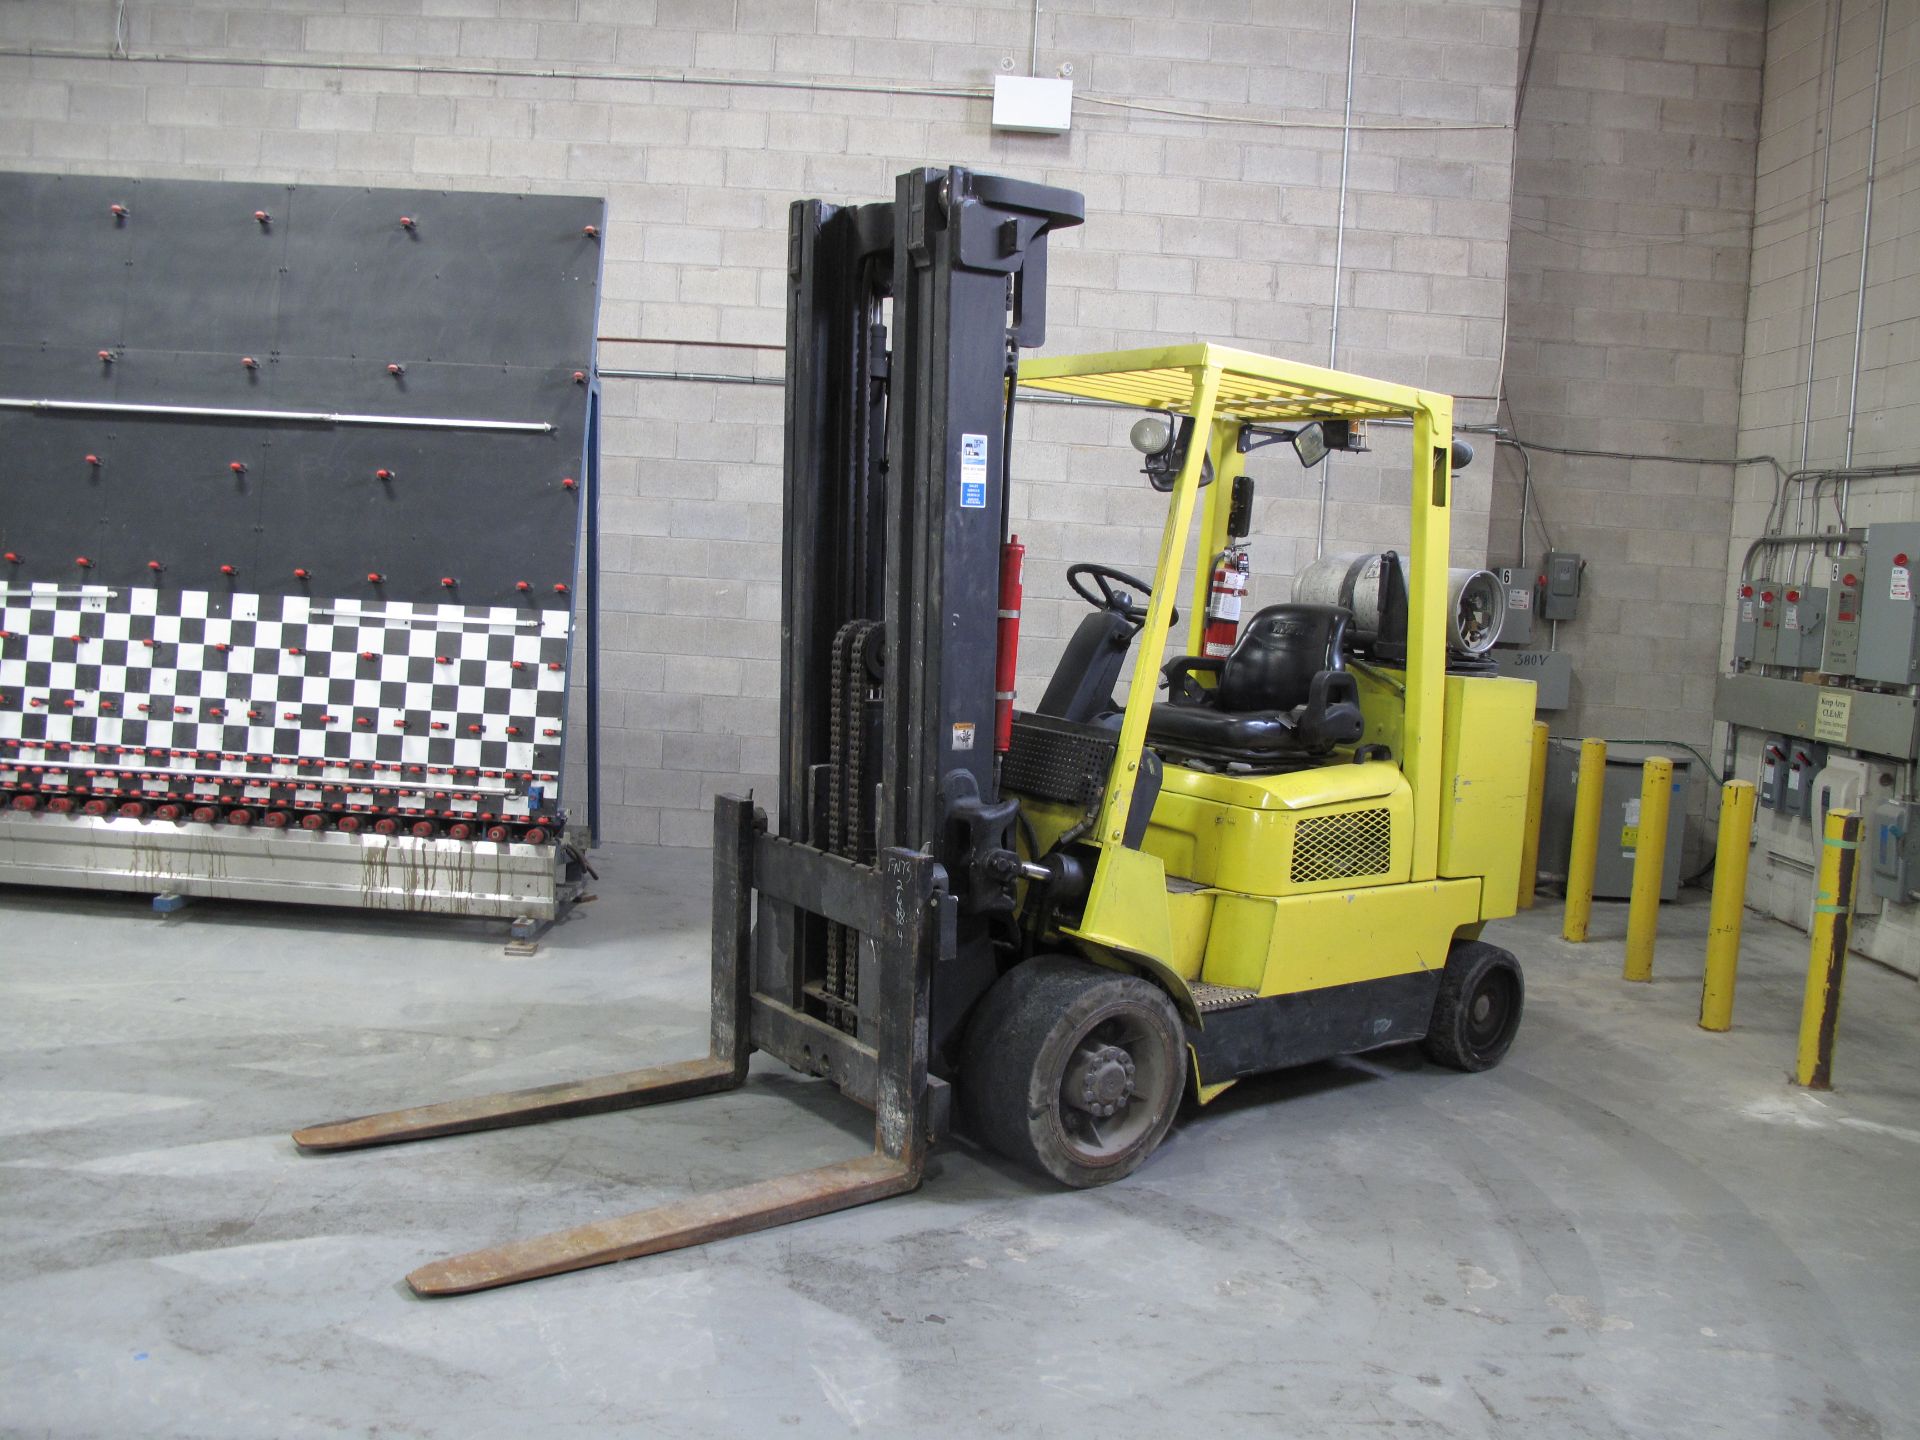 HYSTER, S120XMS-PRS, 12,000 LBS, 3 STAGE, LPG FORKLIFT, 48" FORKS, 208" MAXIMUM LIFT, 9,701 HOURS, - Image 2 of 7